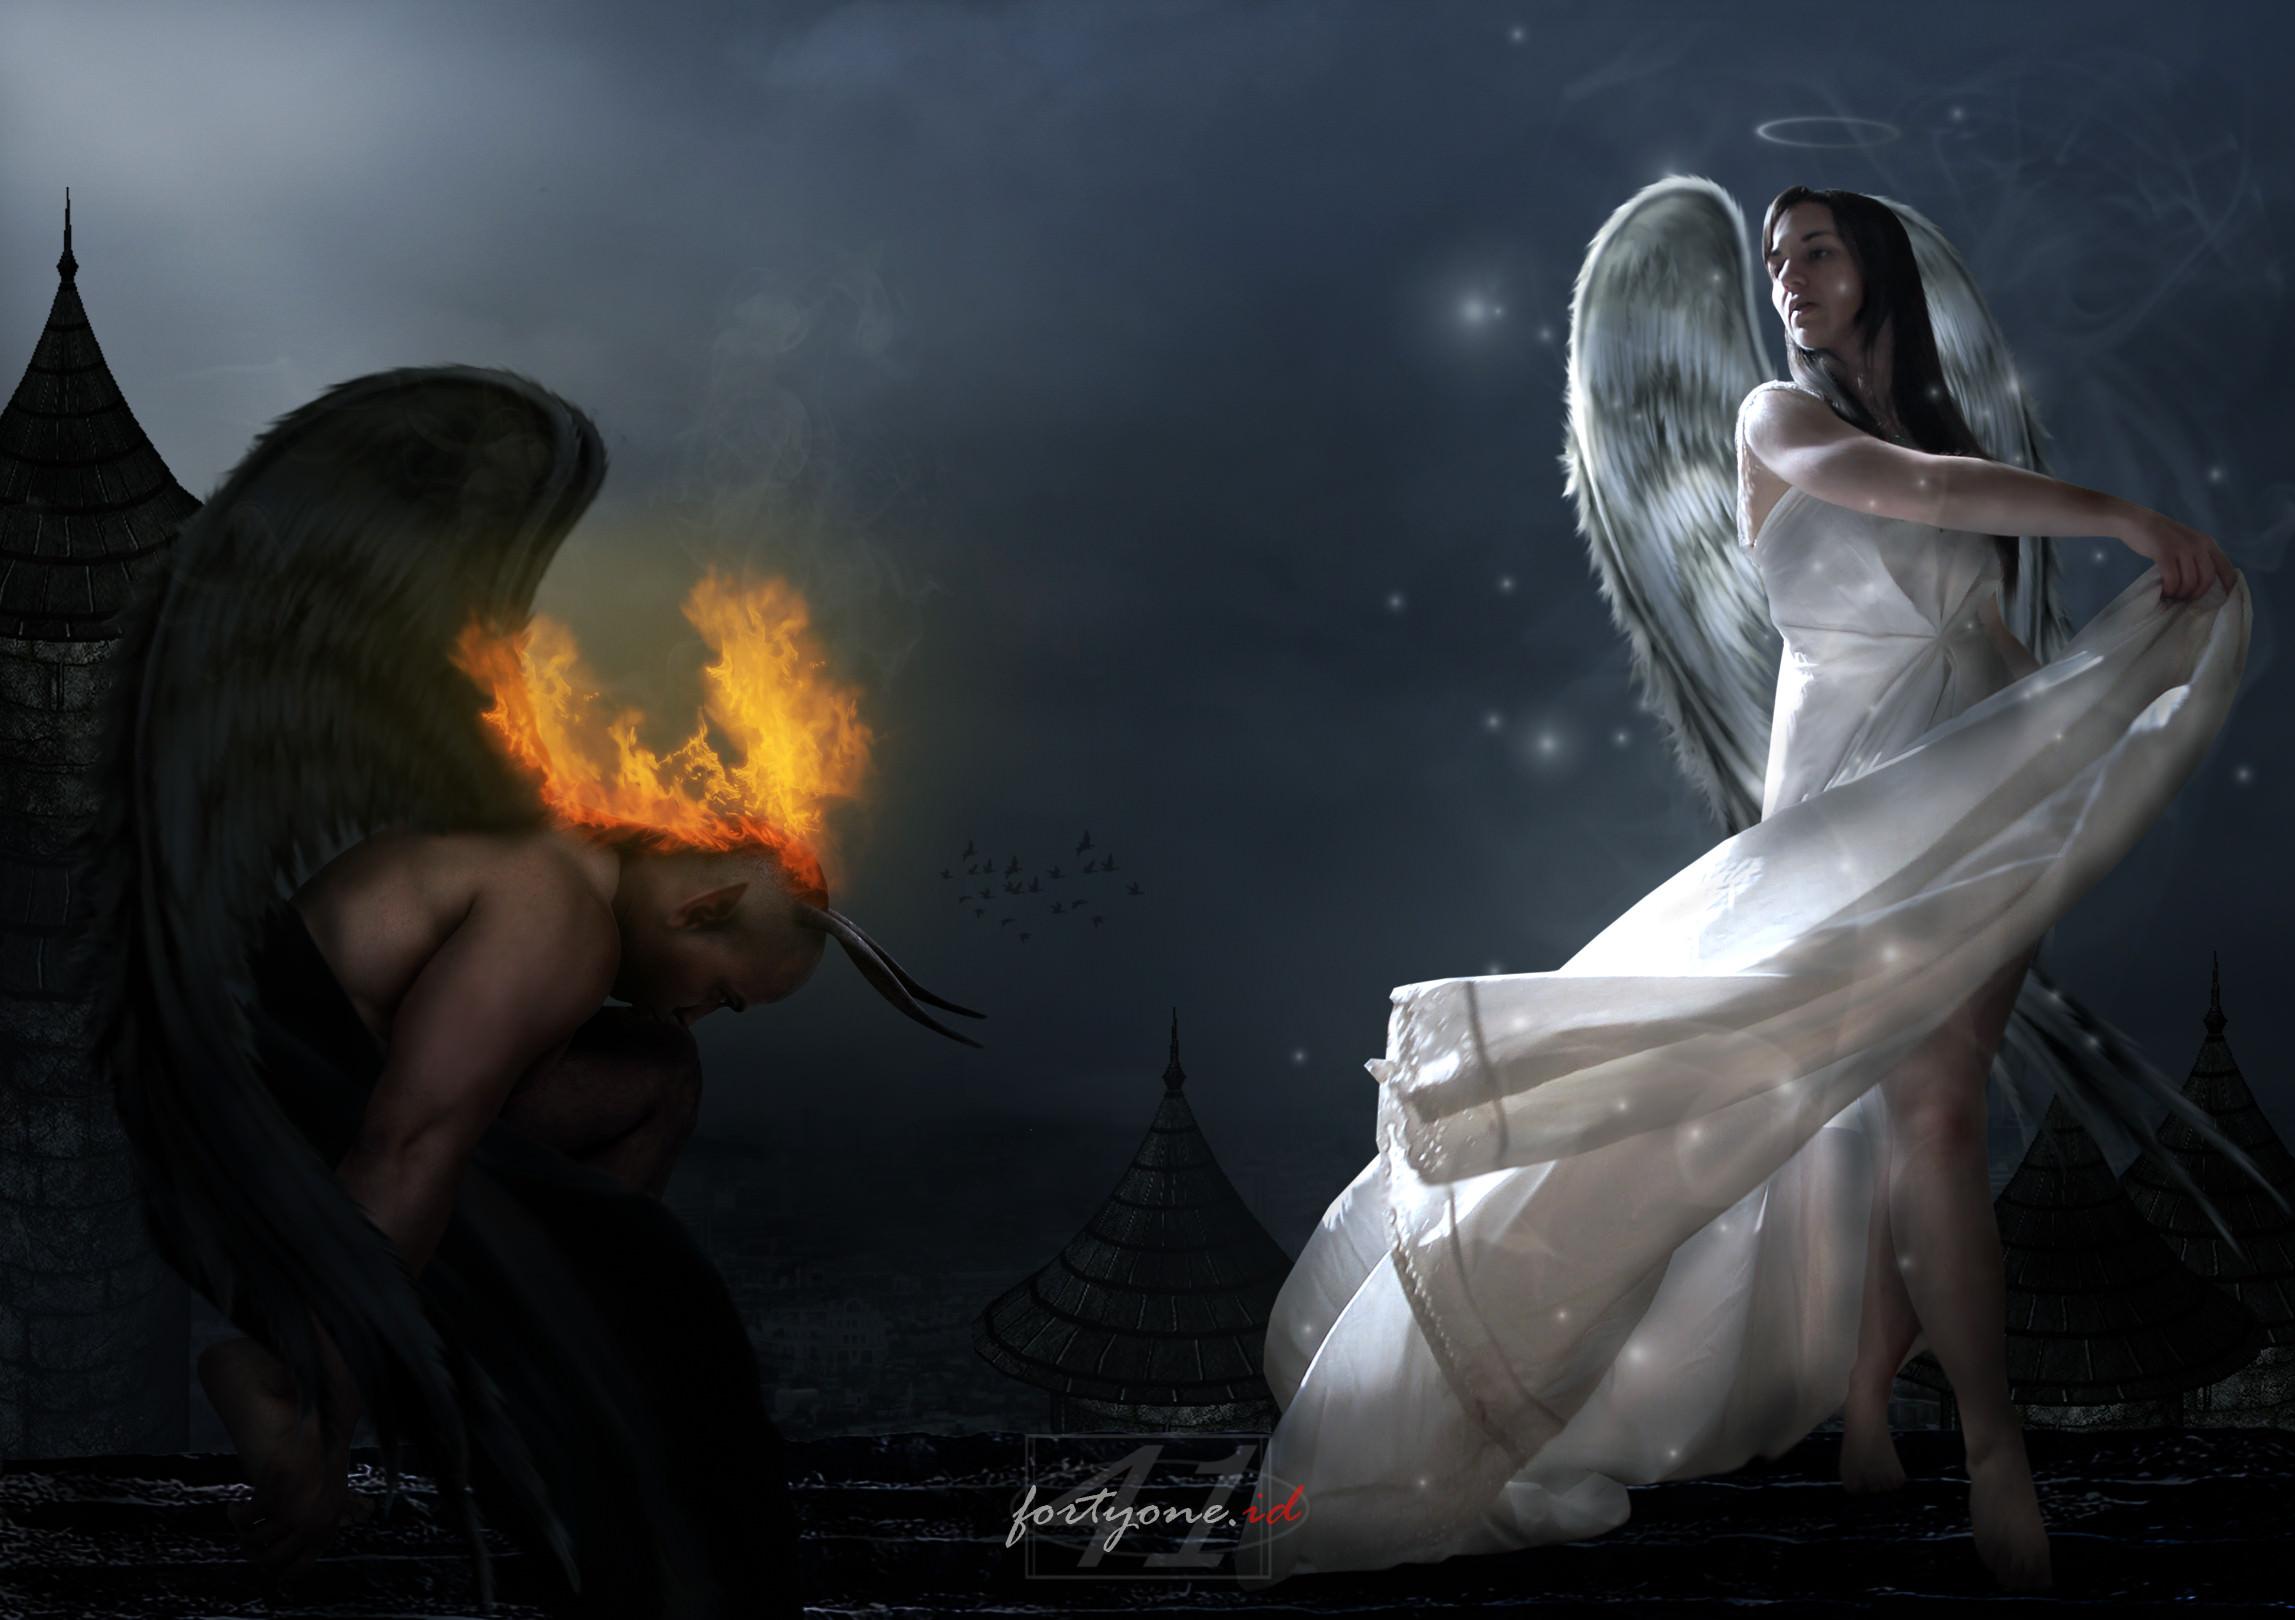 Demon and Angel wallpaper from Angels wallpaper